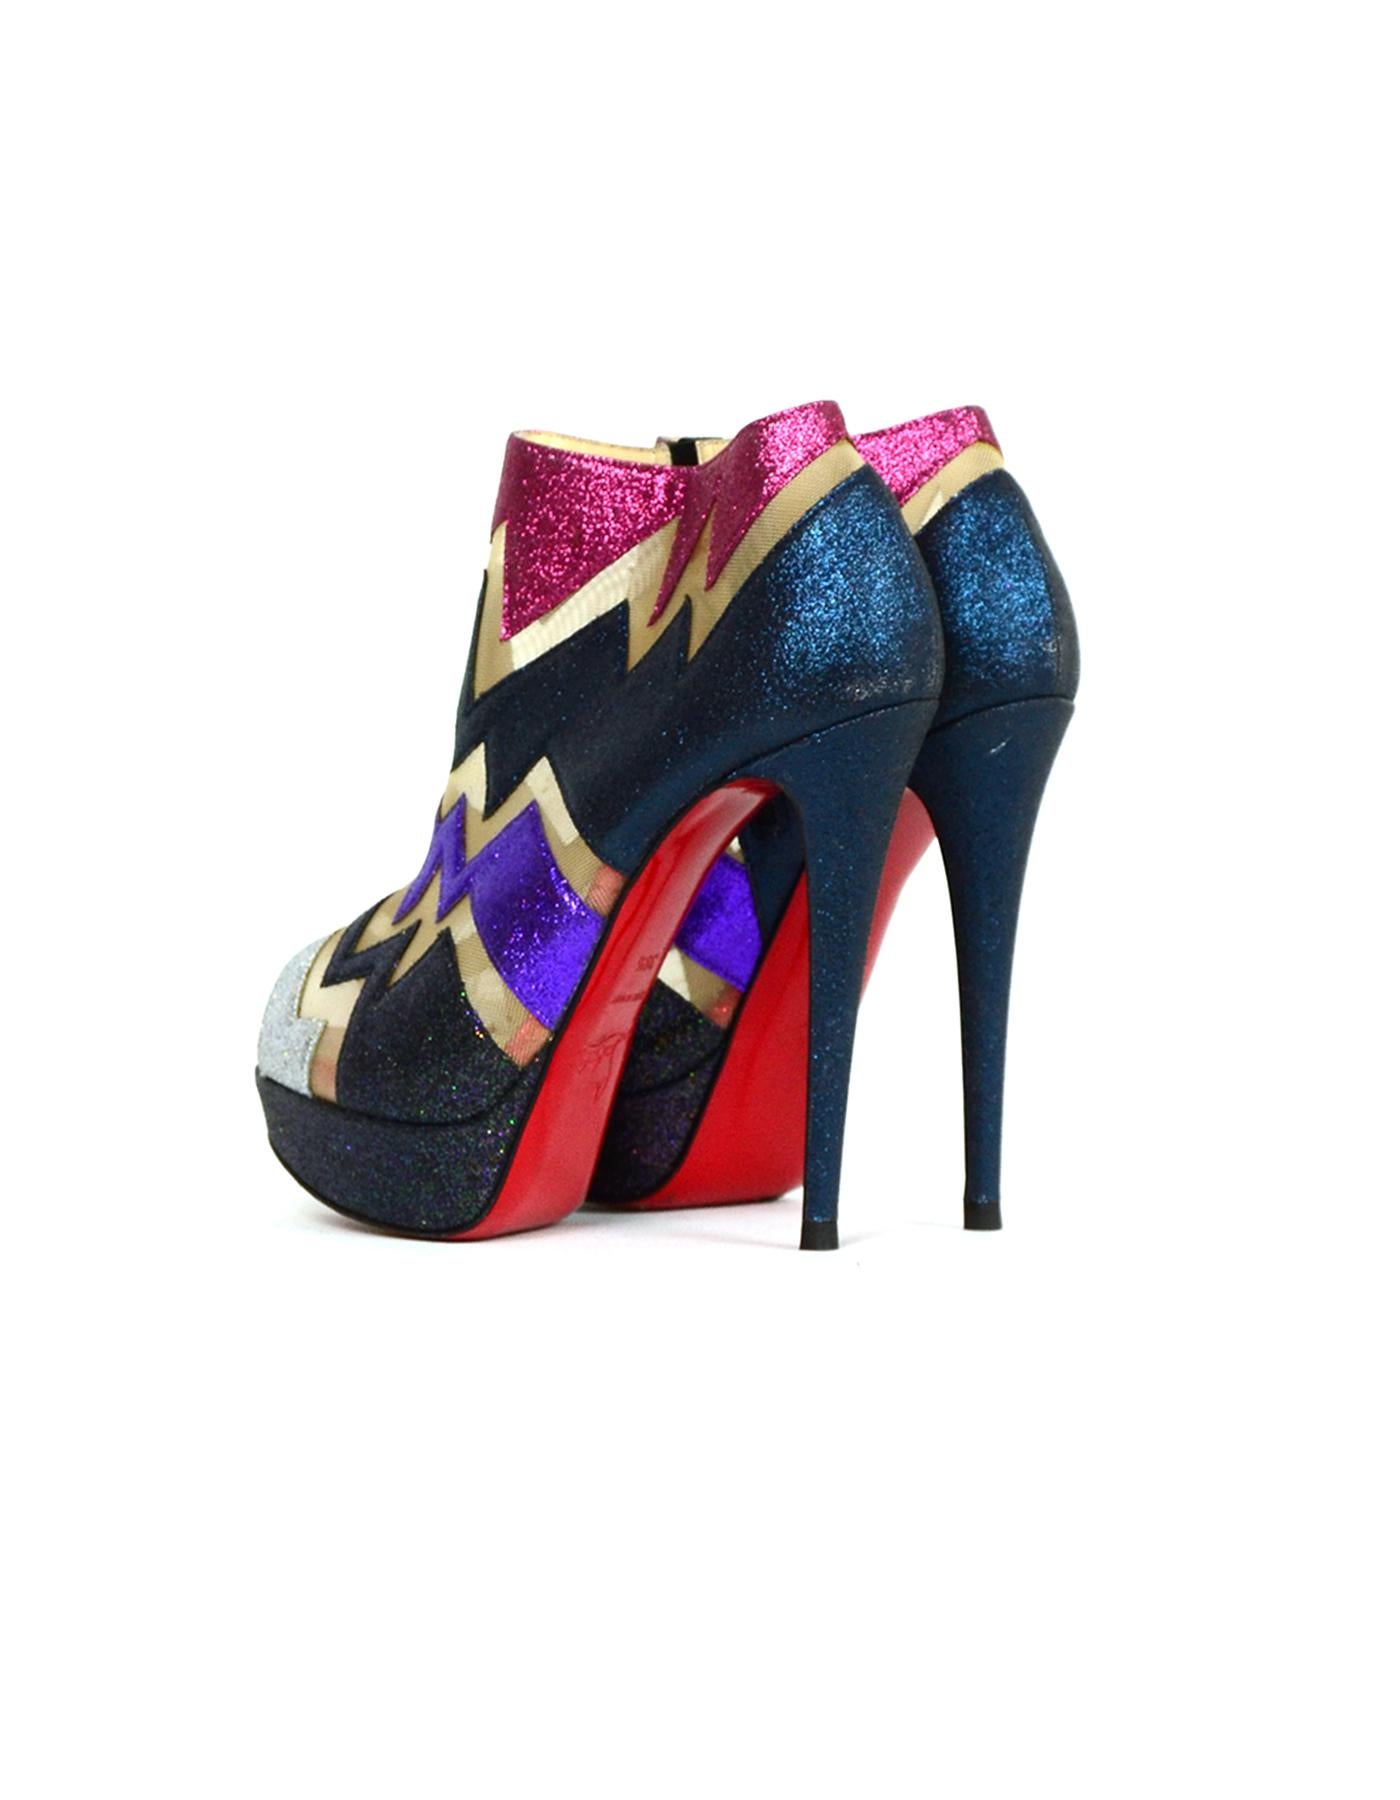 Christian Louboutin ZIGGY 150 Multi-color Glitter Platform Booties sz 38.5

Made In: Italy
Color: Red, purple, navy
Hardware: Black
Materials: Mesh, glitter
Closure/Opening: Side zip
Overall Condition: Good pre-owned condition Minor stains on